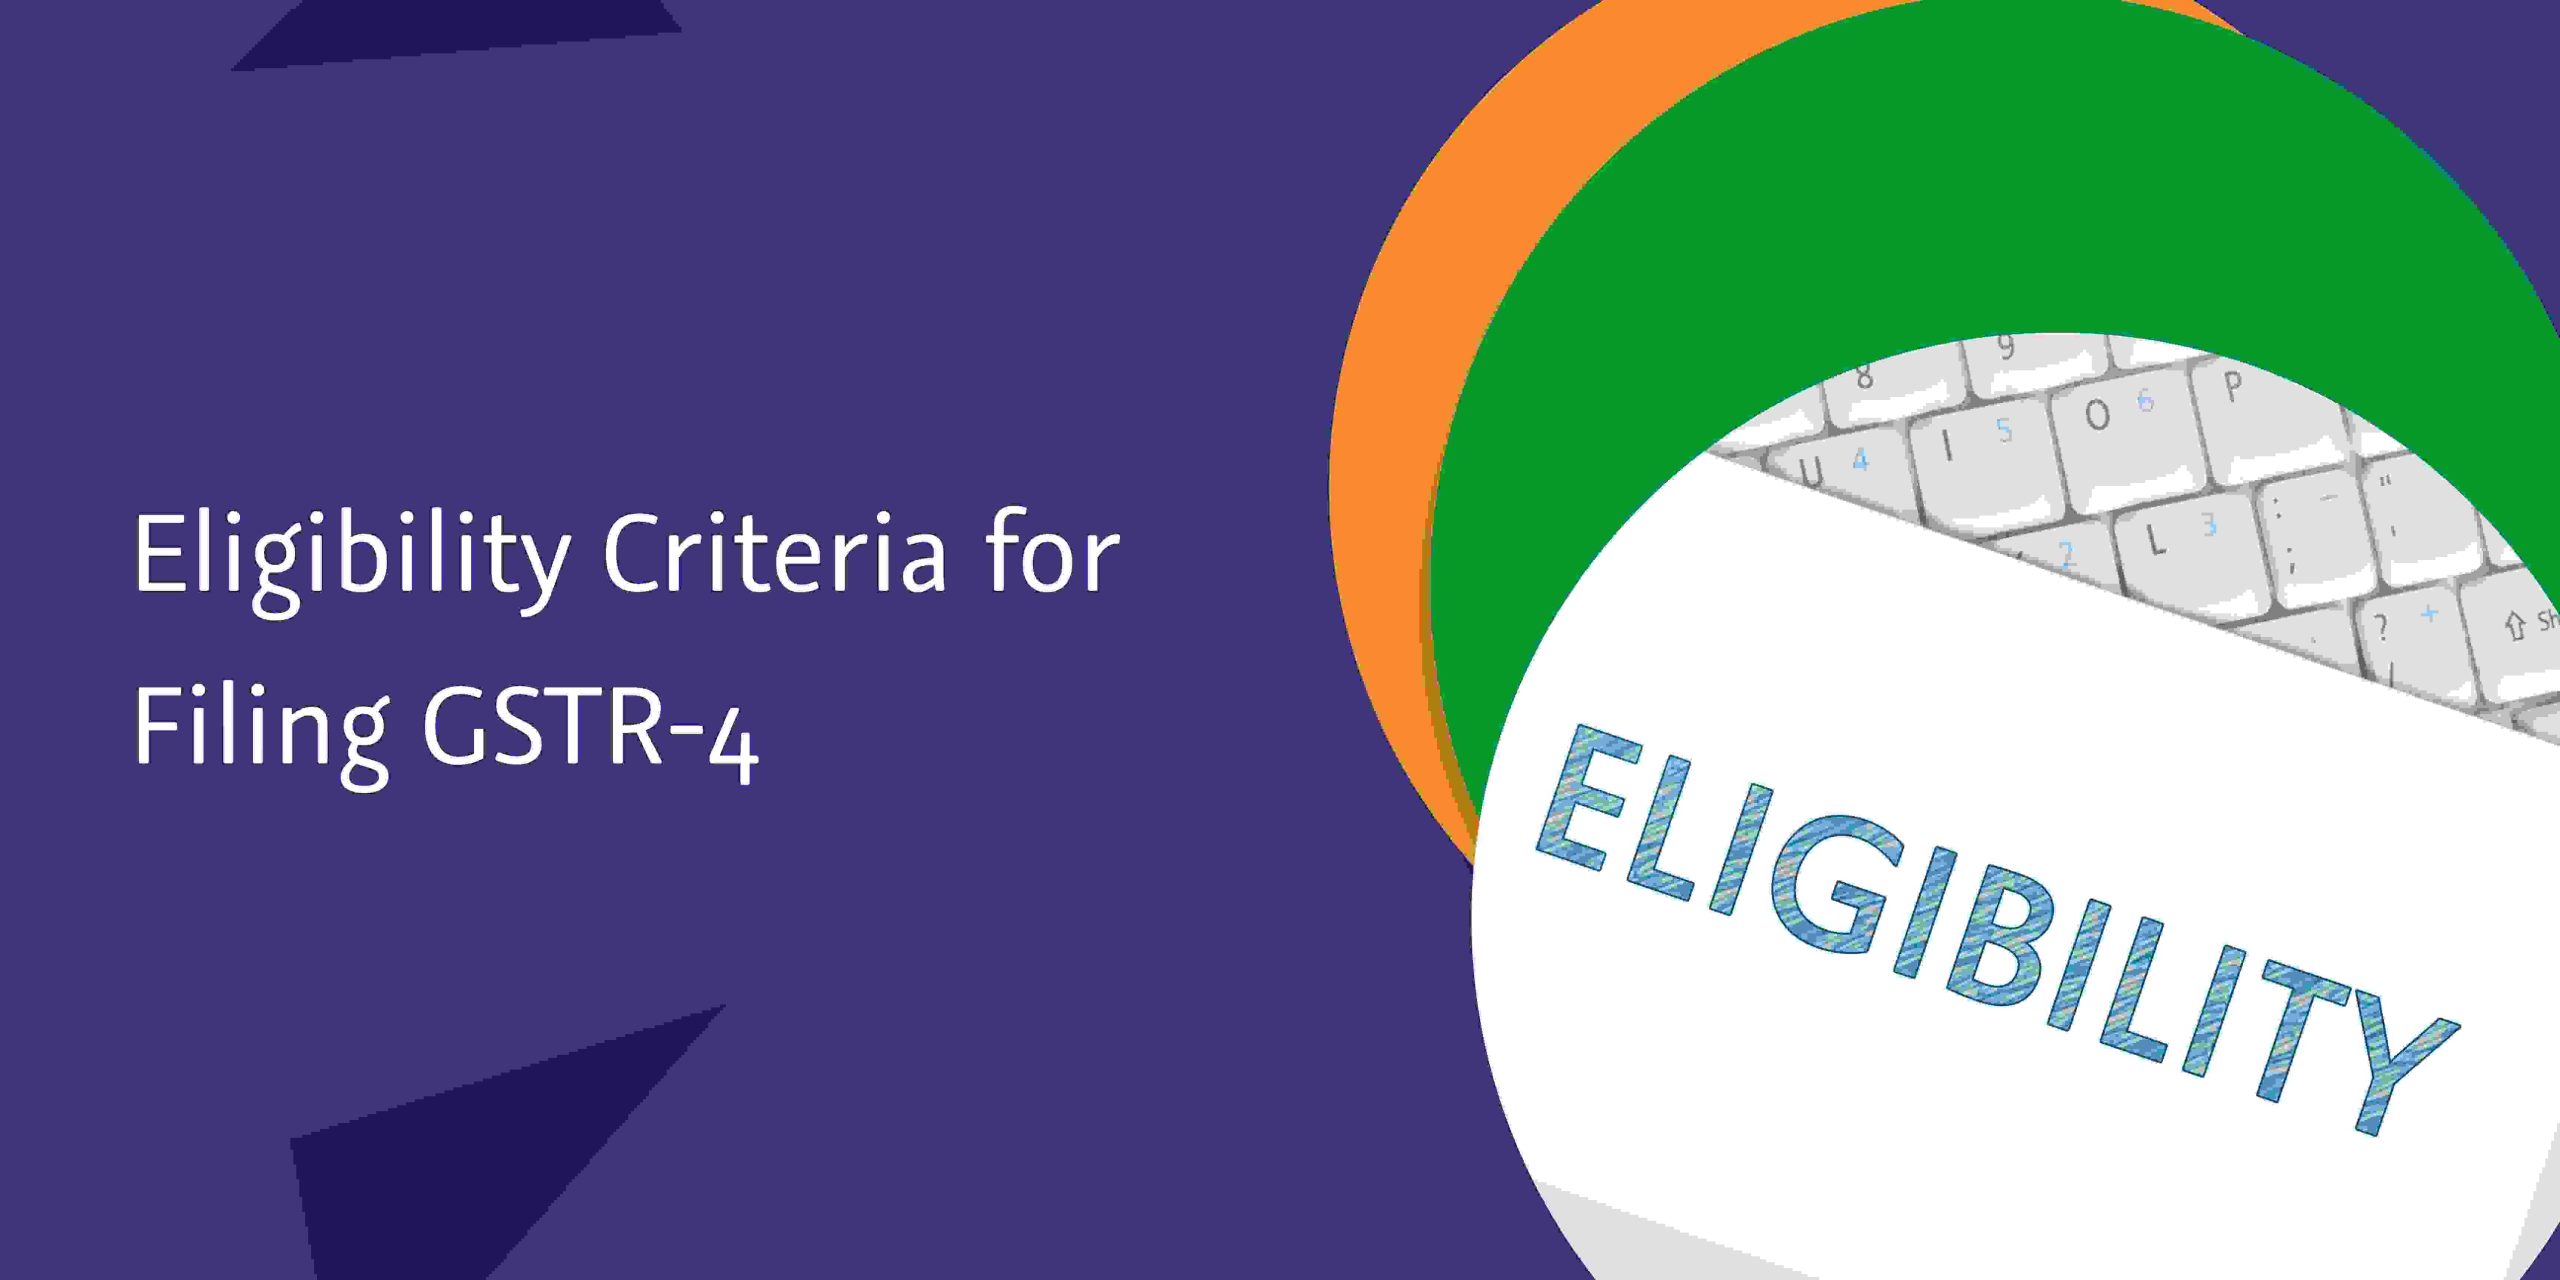 You are currently viewing Eligibility Criteria for Filing GSTR-4